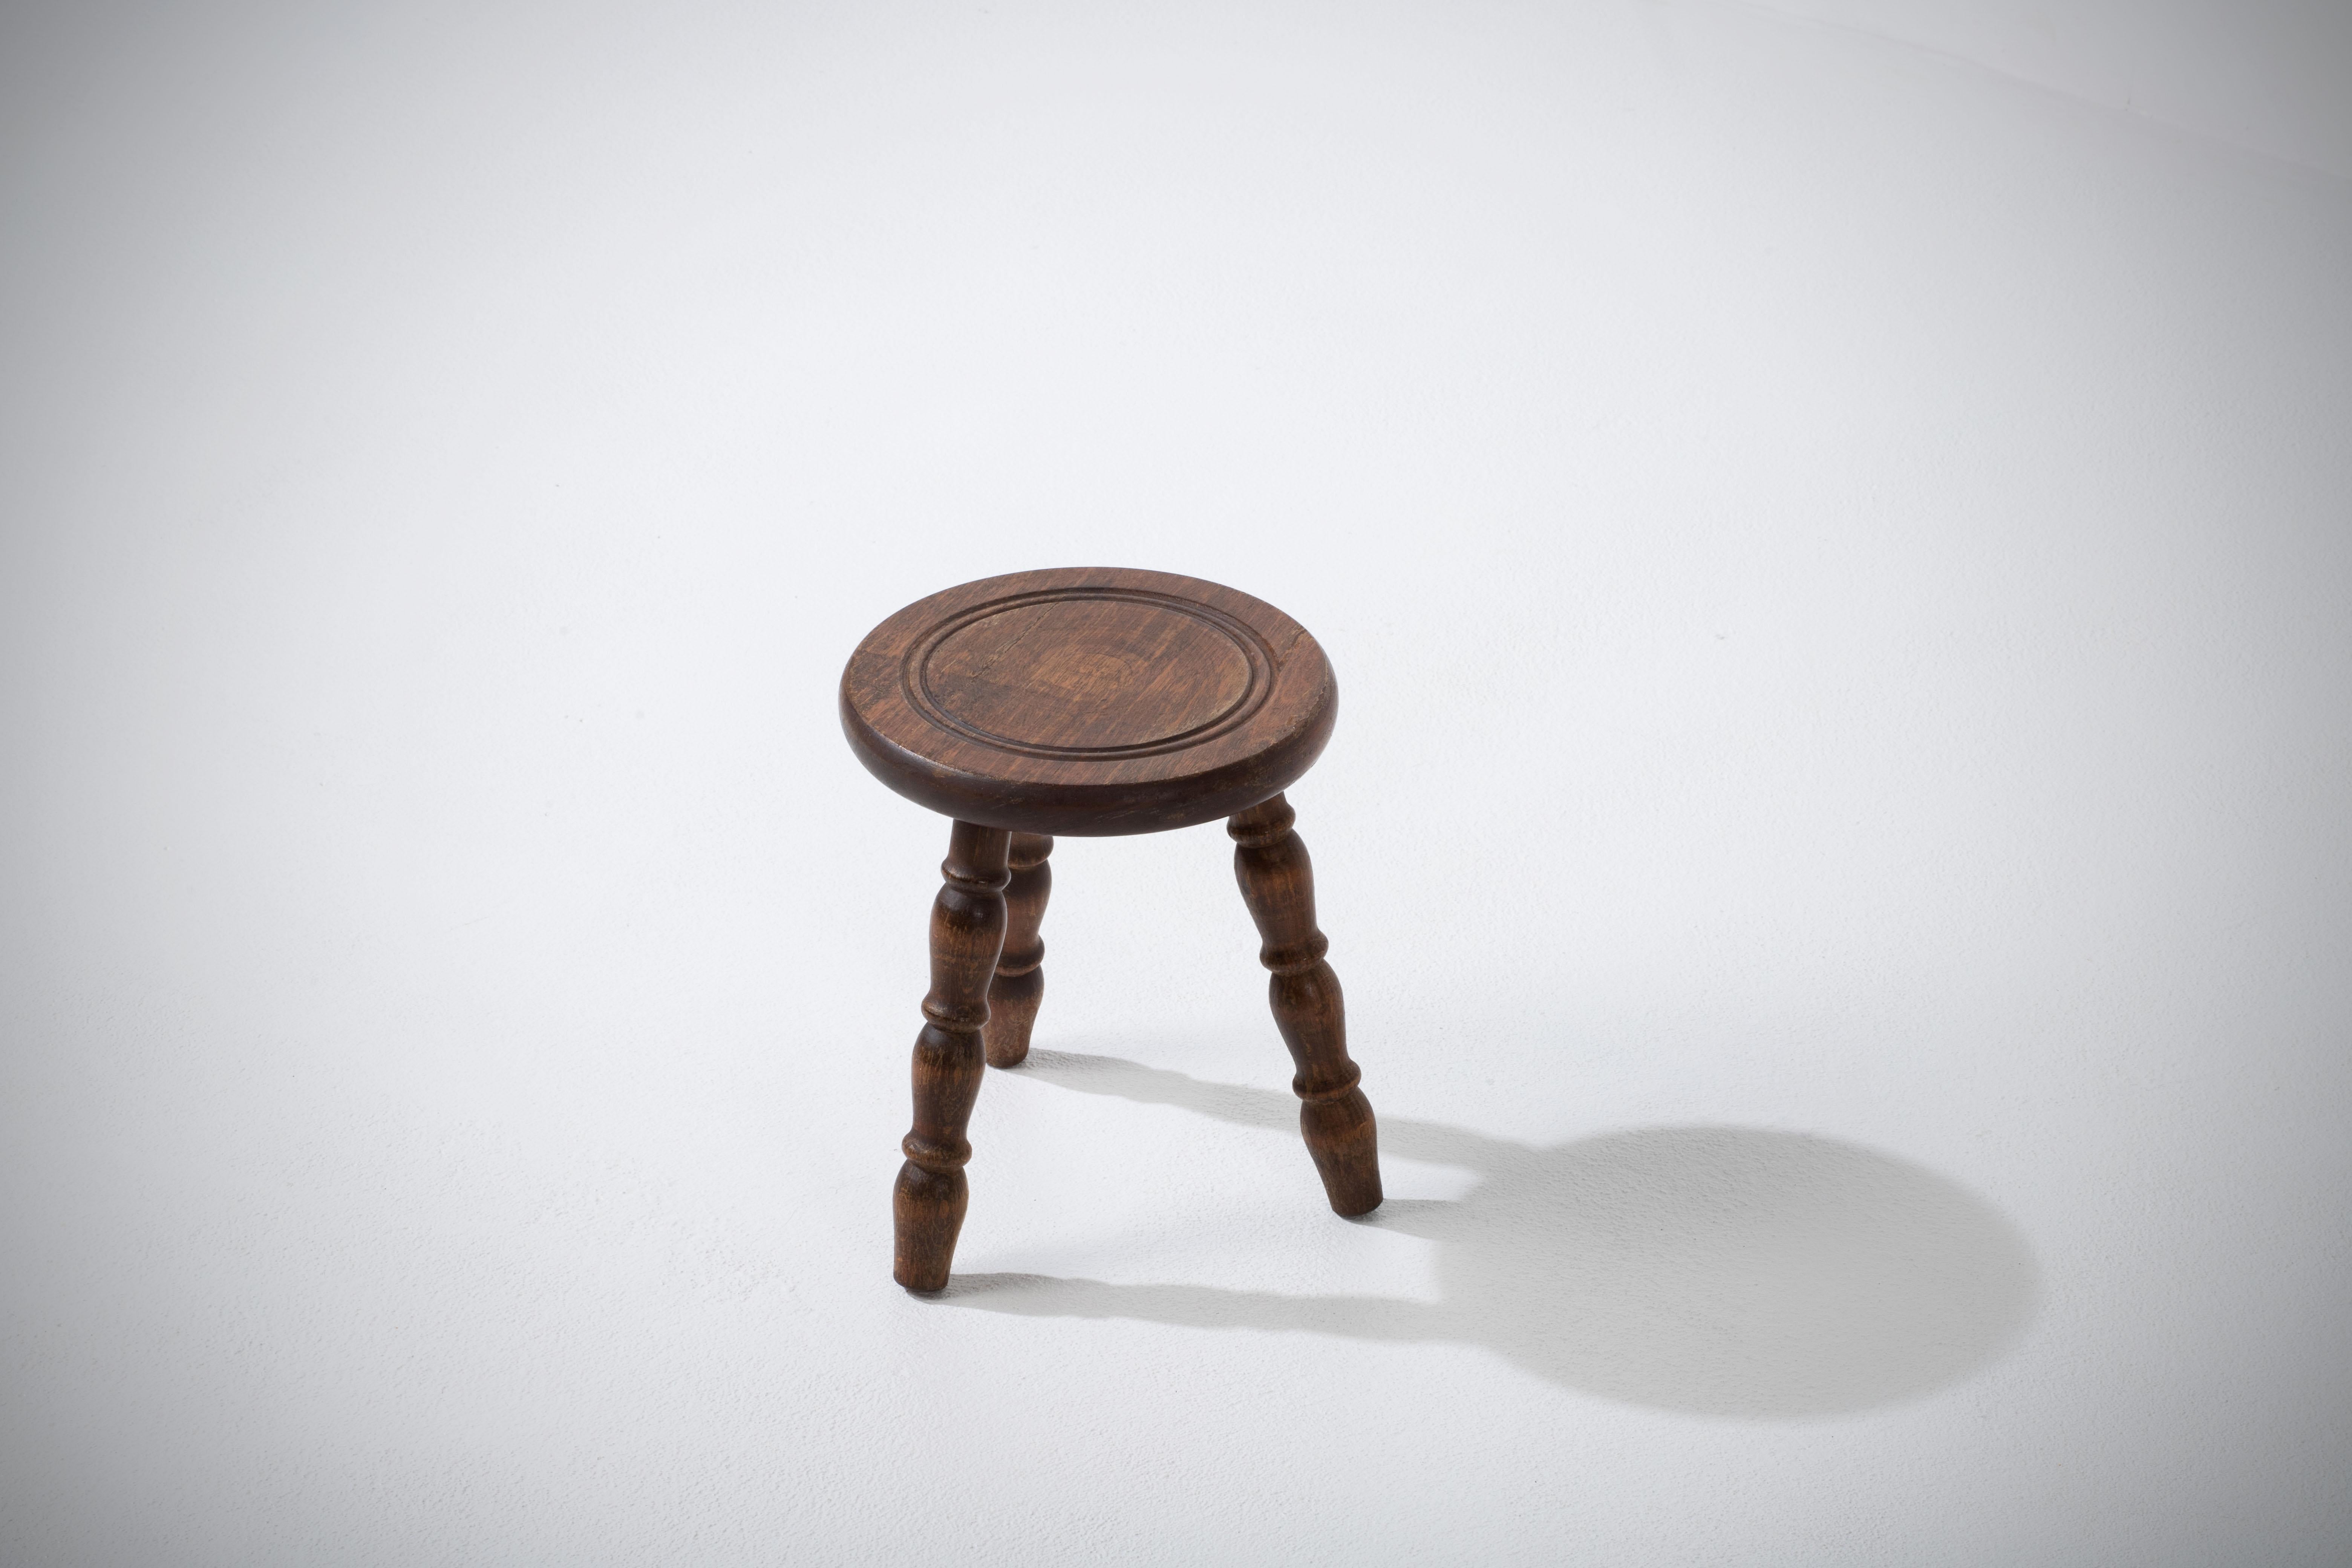 Hand-Carved Midcentury Oak Stool with Turned Wood Legs, 1960s, France For Sale